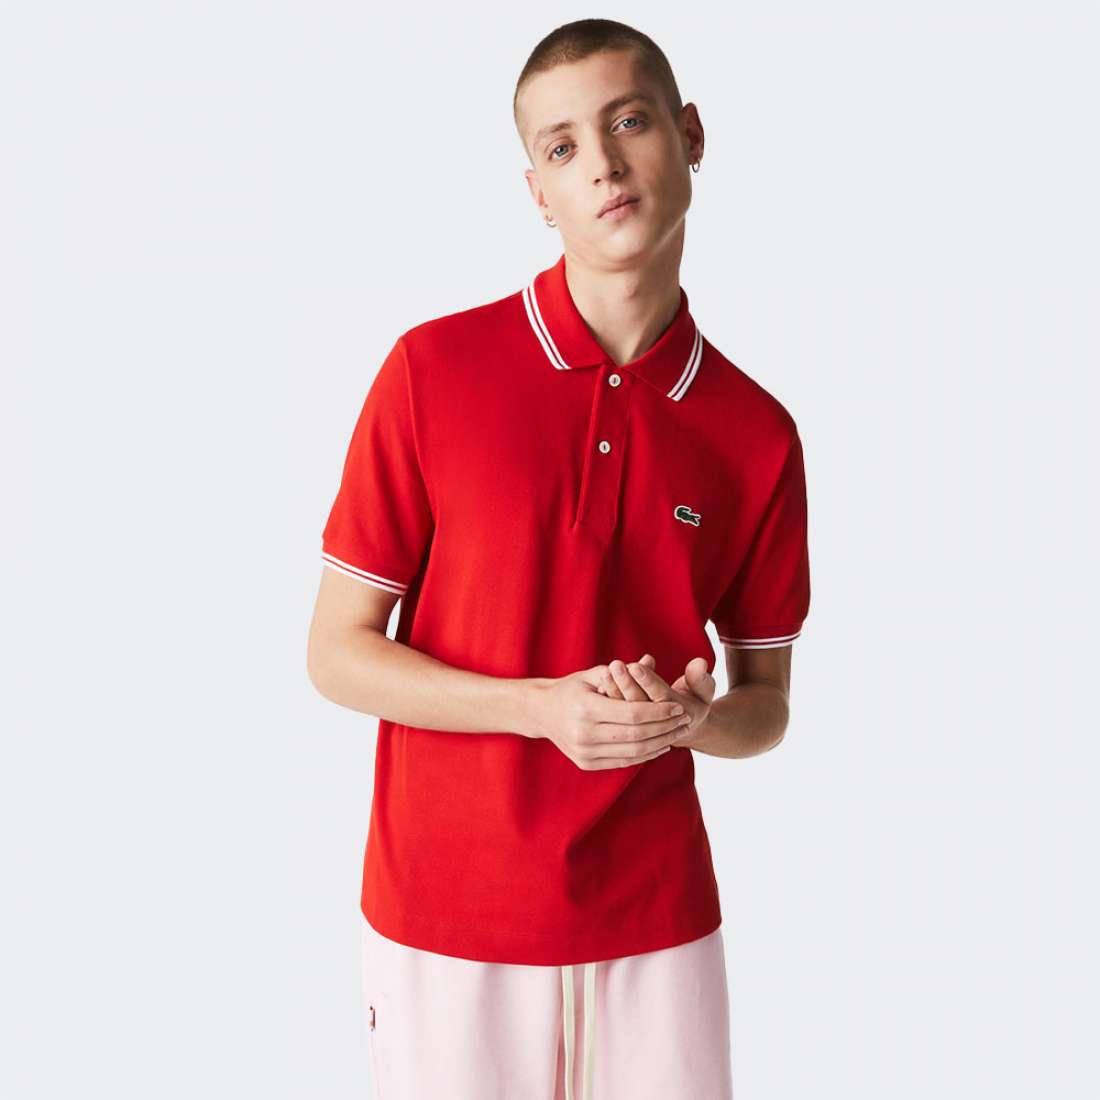 POLO LACOSTE PH238400-564 SLIM FIT ROUGE/BLANC